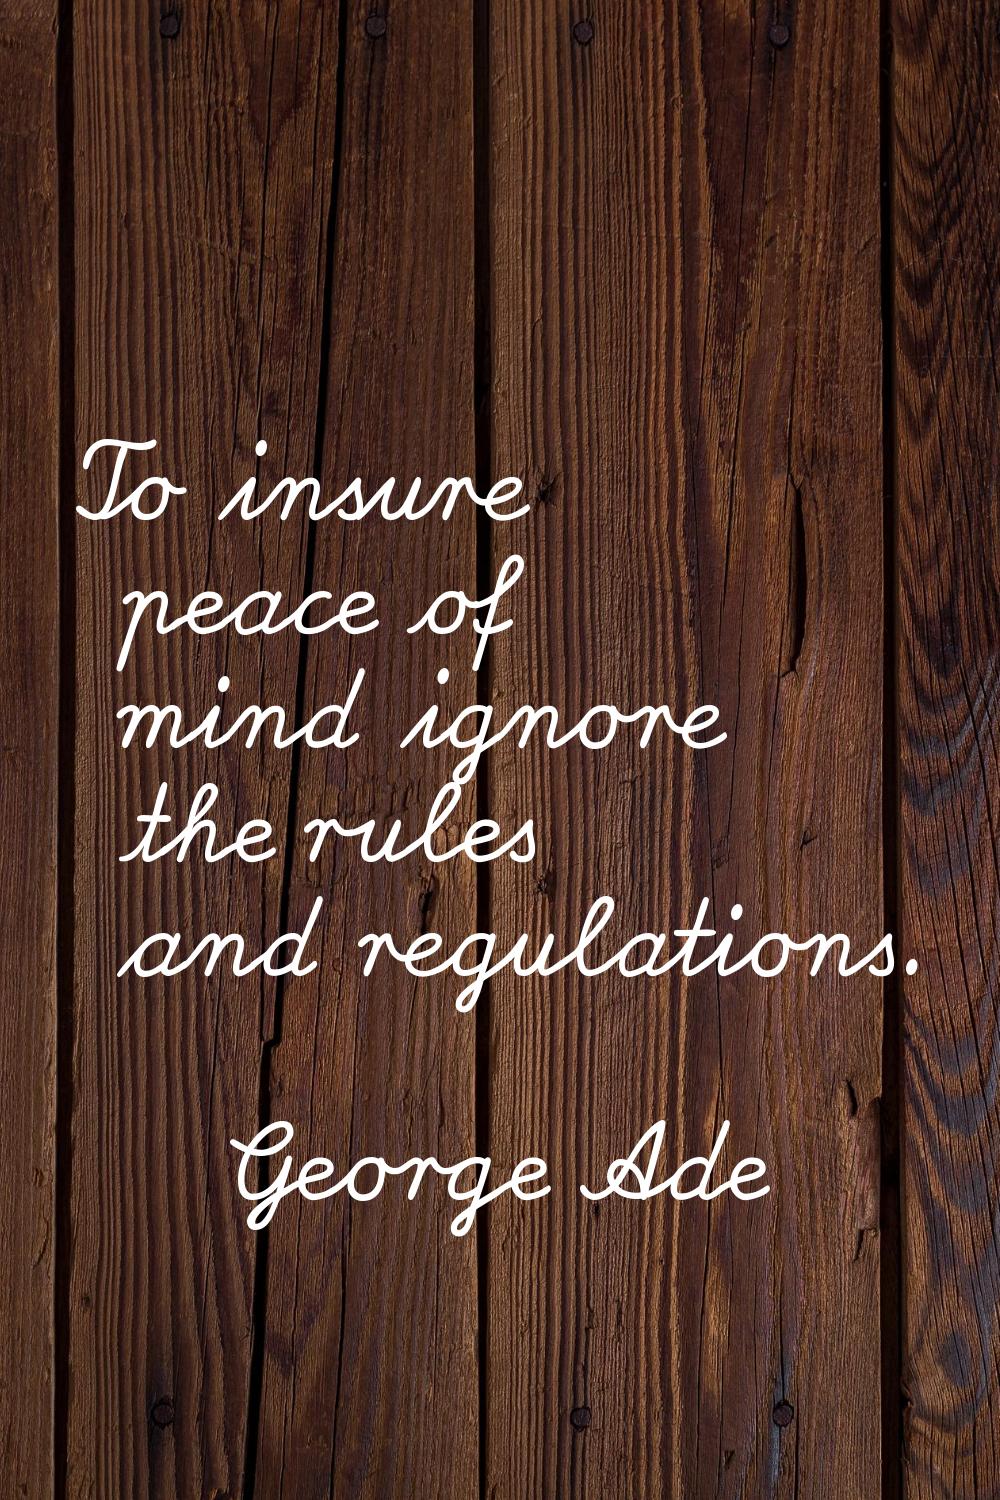 To insure peace of mind ignore the rules and regulations.